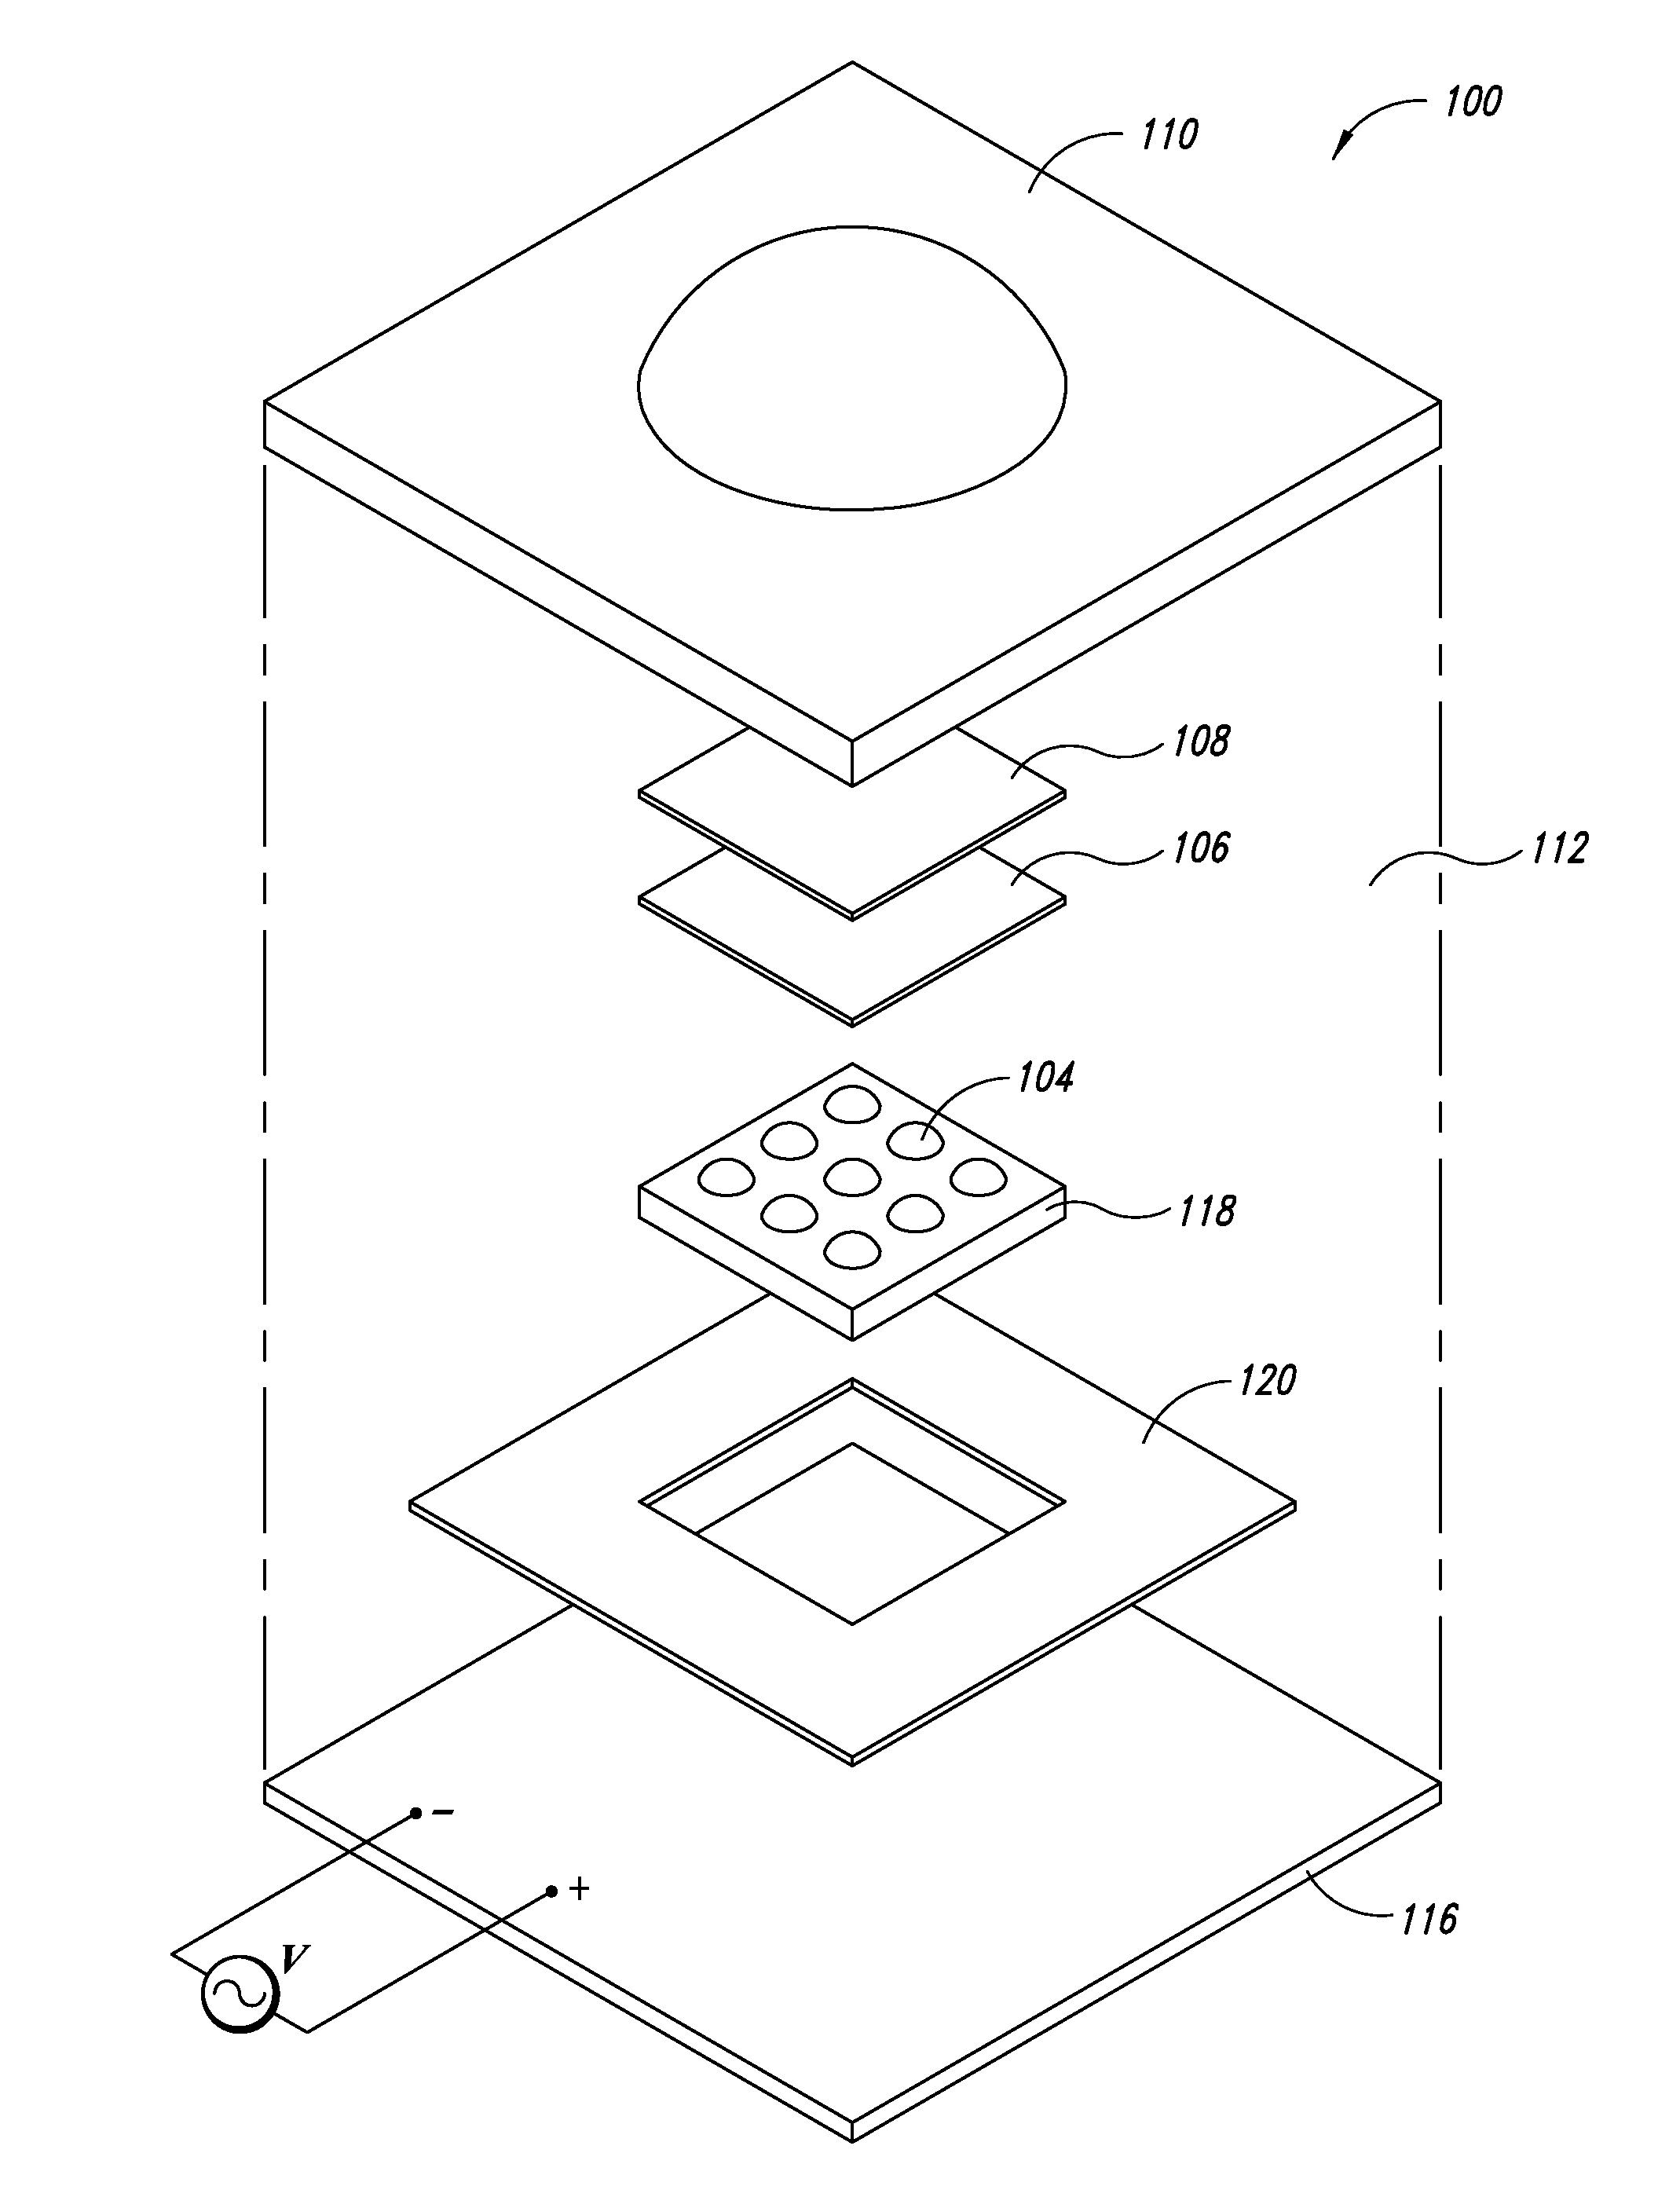 Apparatus, method to enhance color contrast in phosphor-based solid state lights